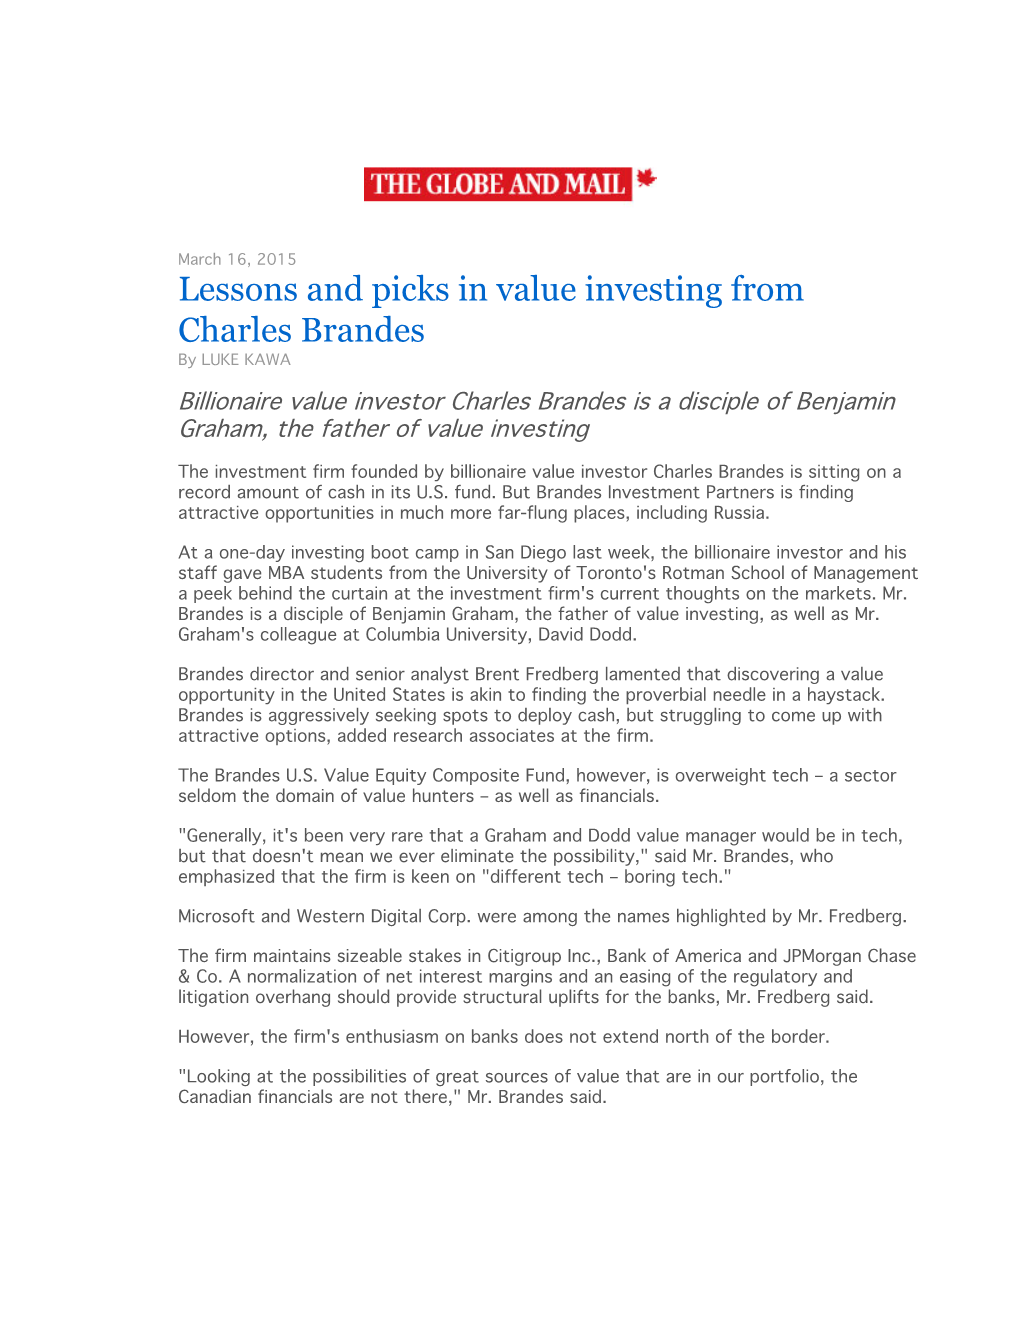 Lessons and Picks in Value Investing from Charles Brandes by LUKE KAWA